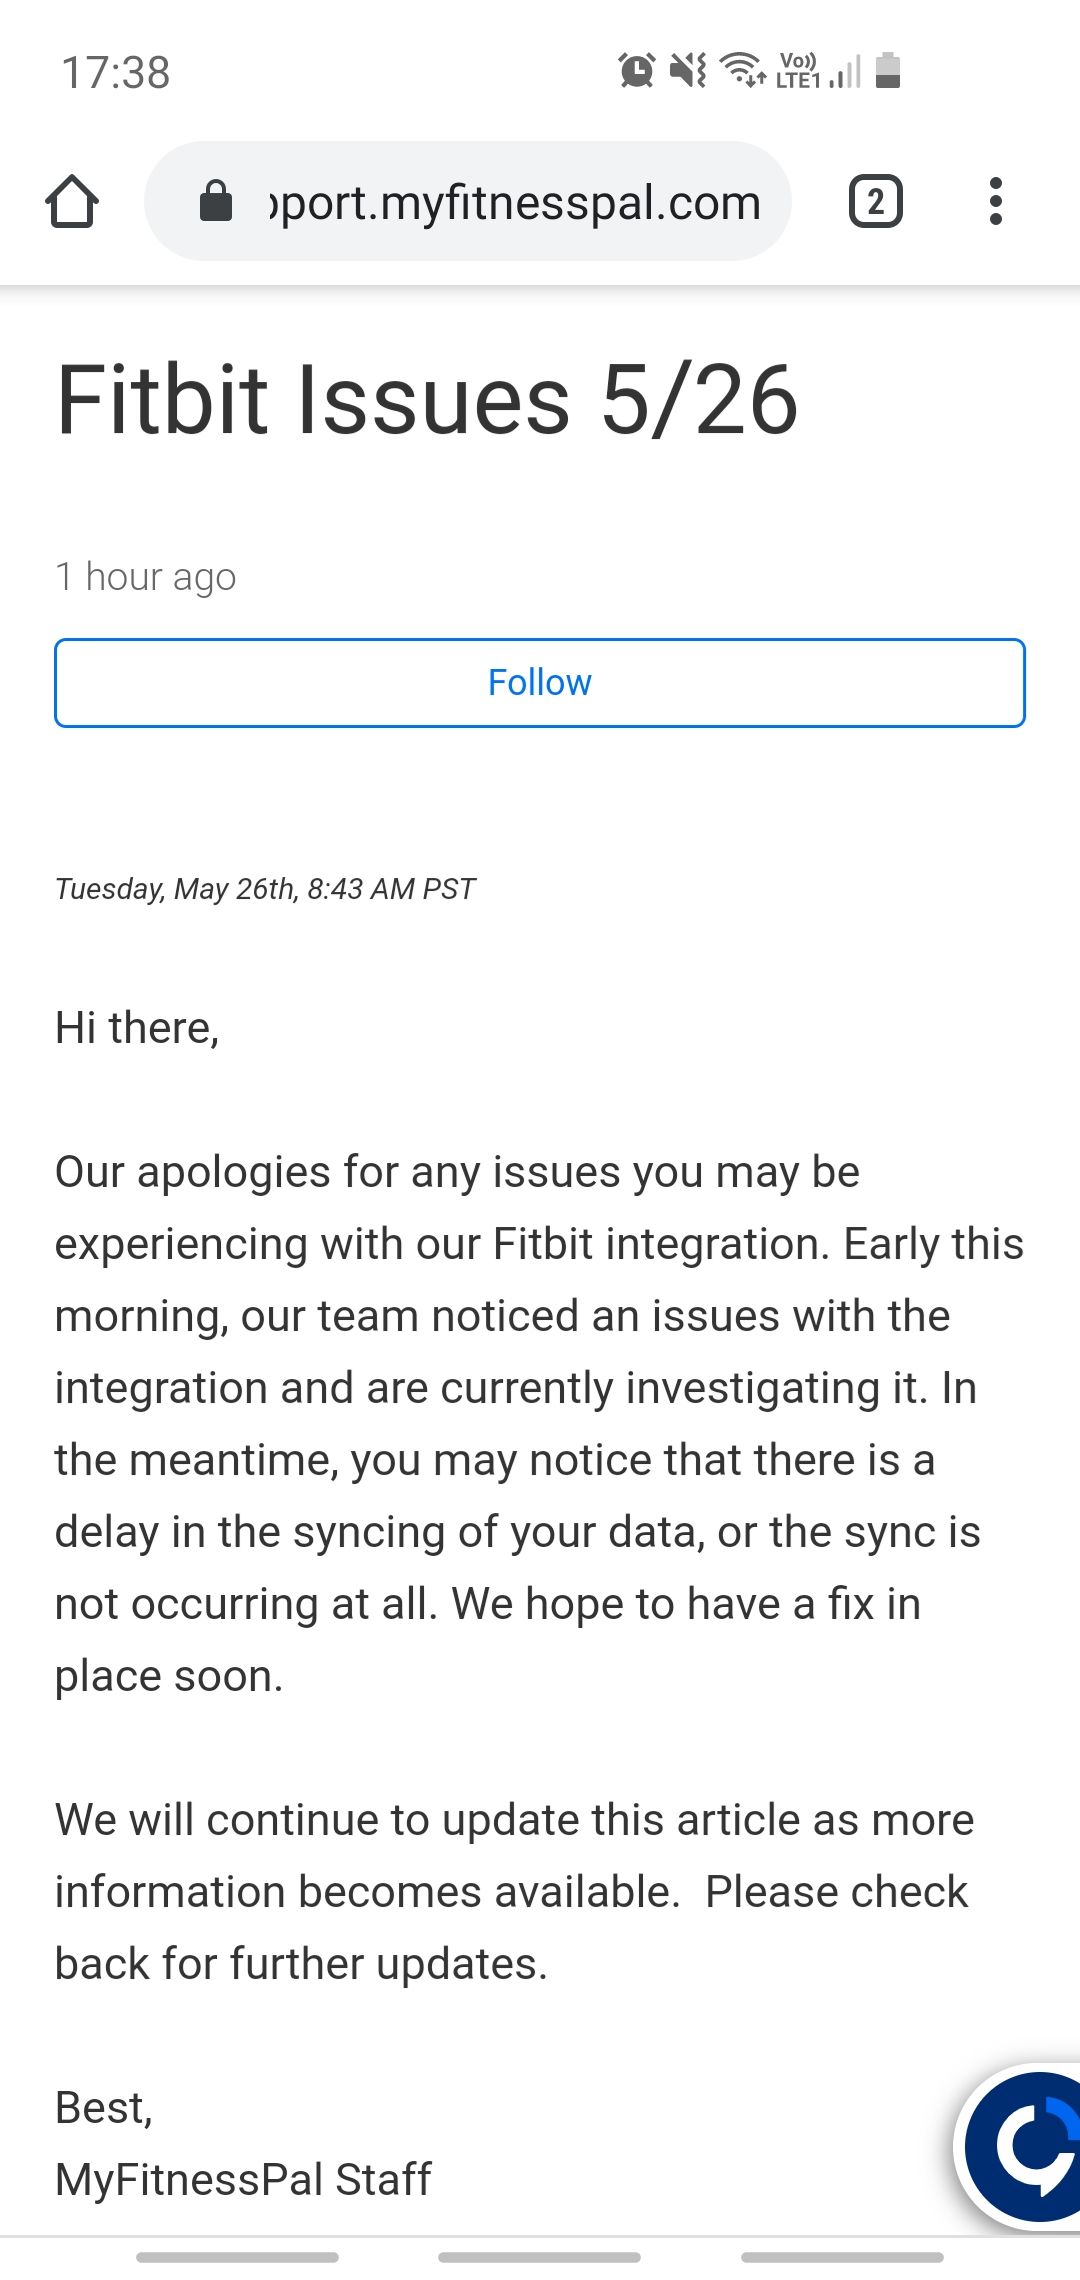 fitbit stopped syncing with myfitnesspal